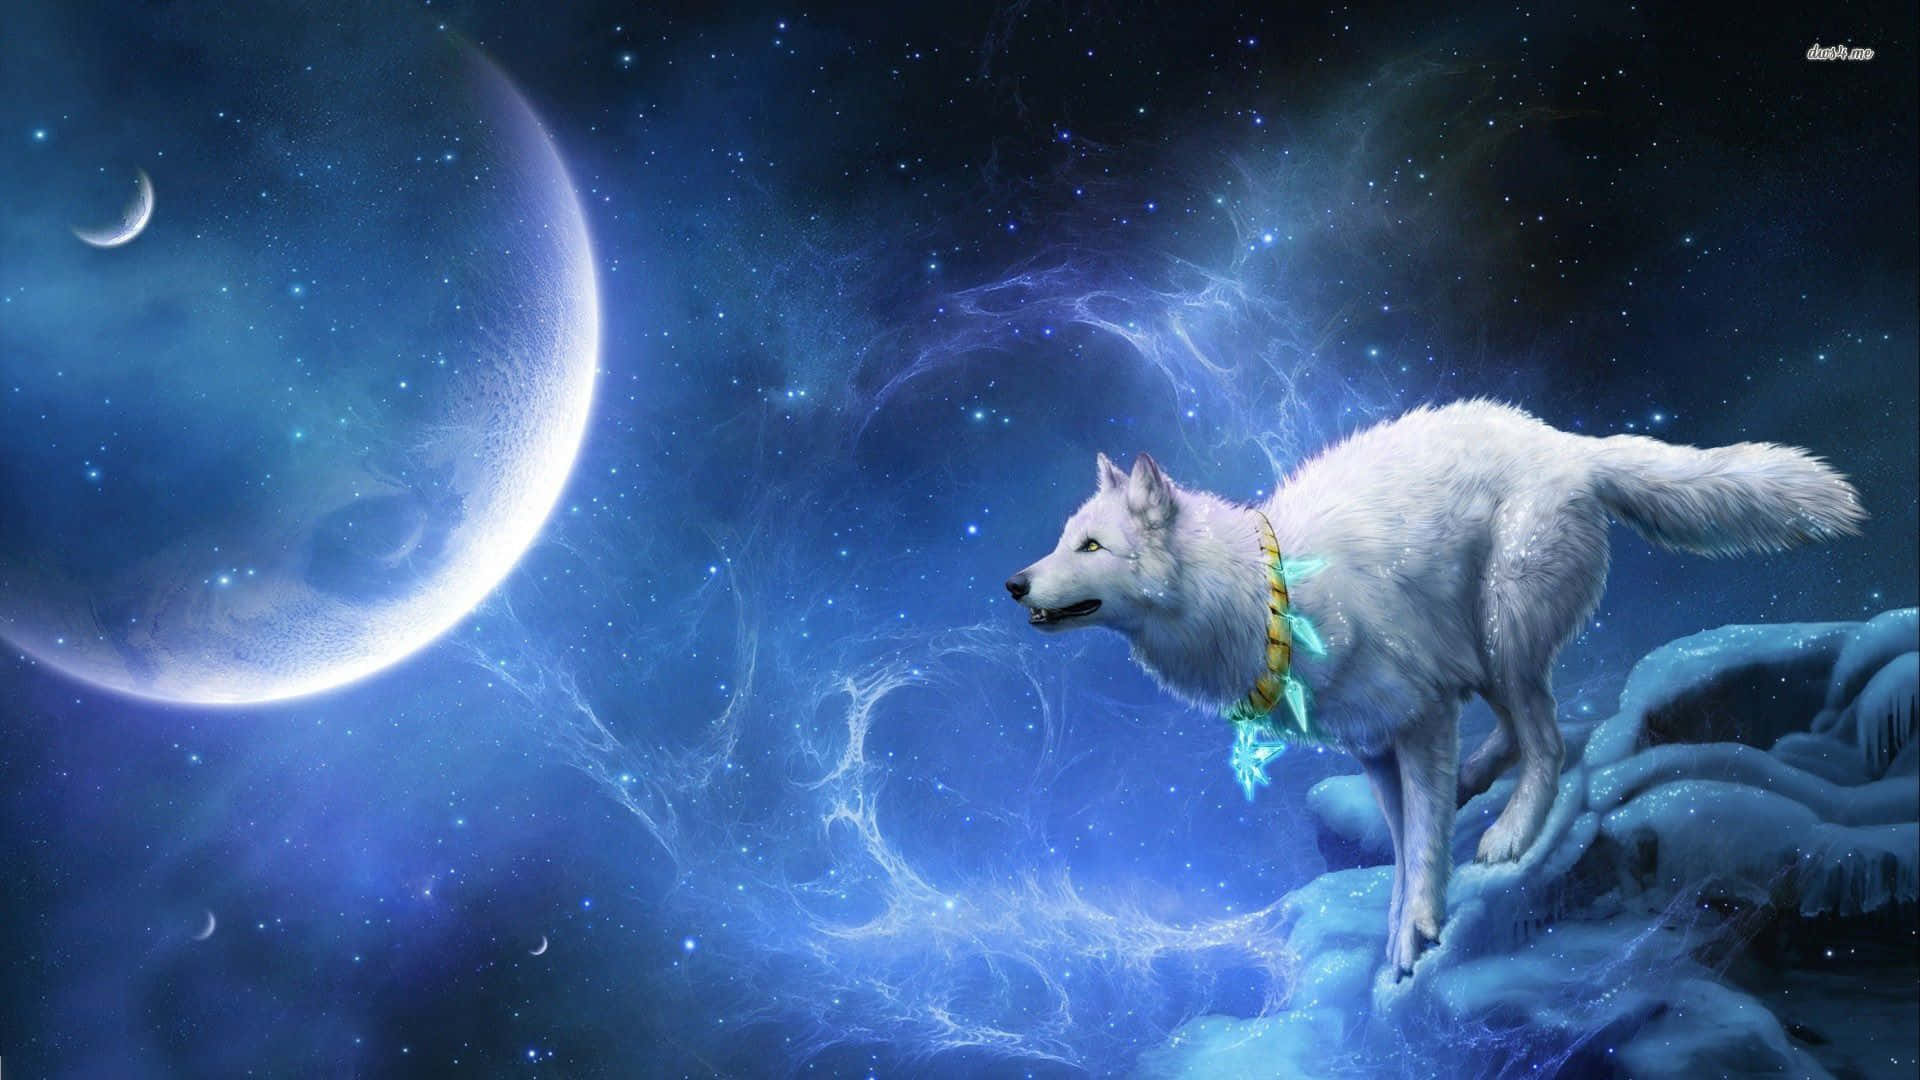 A fierce cool anime wolf stares into the night Wallpaper